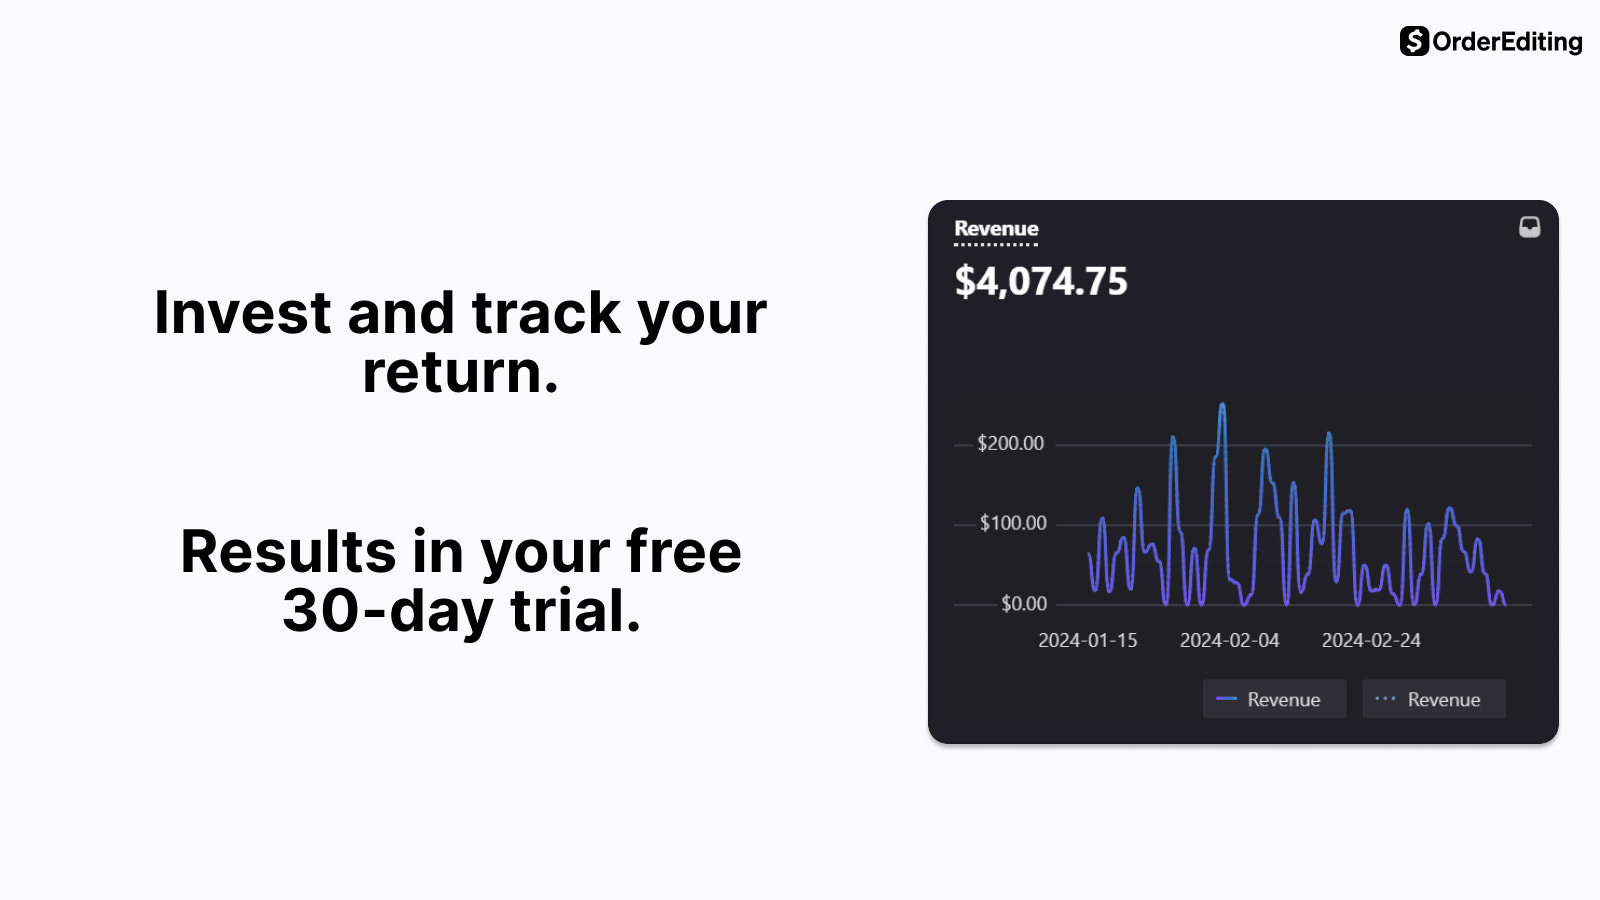 Invest and track your return